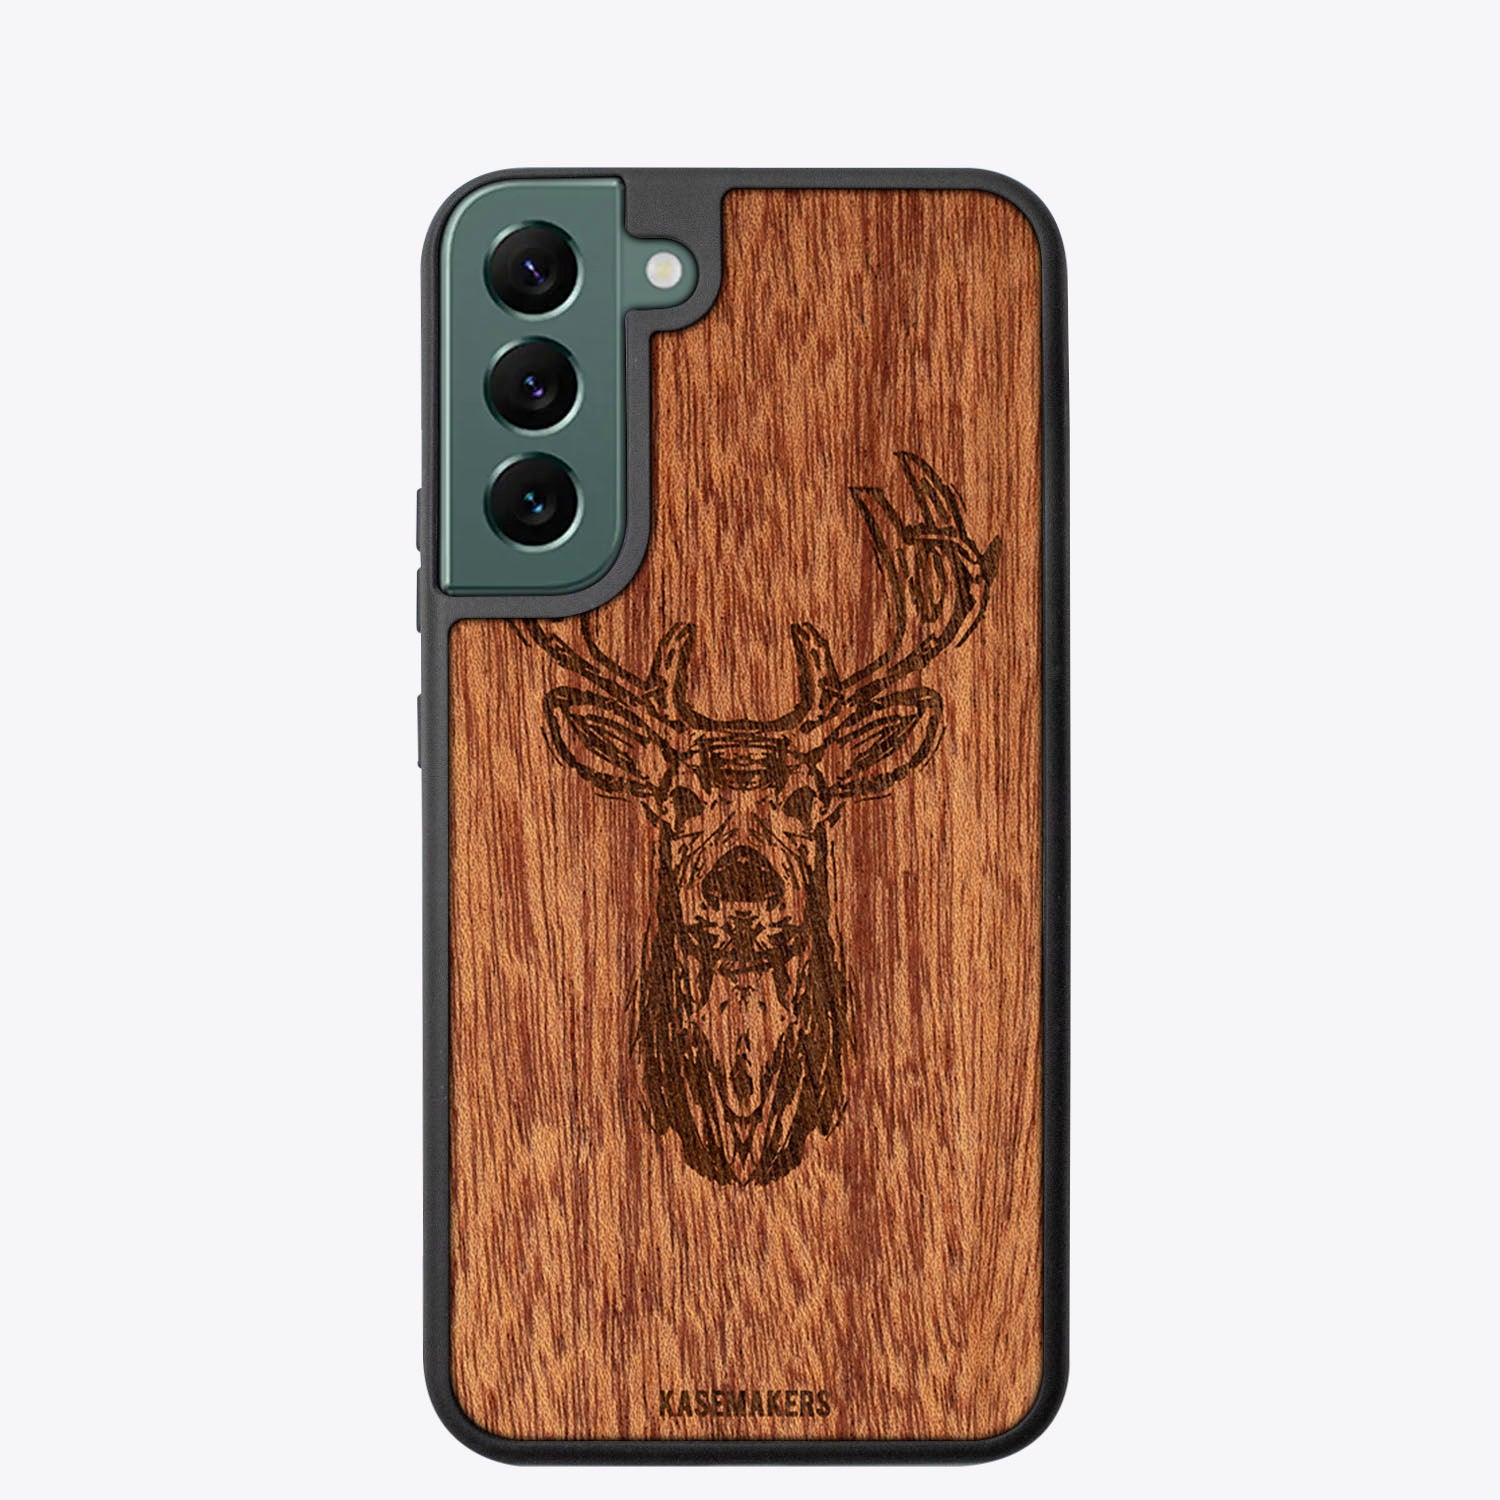 Deer Kase for Samsung Galaxy S22 - Buy One Get One FREE!